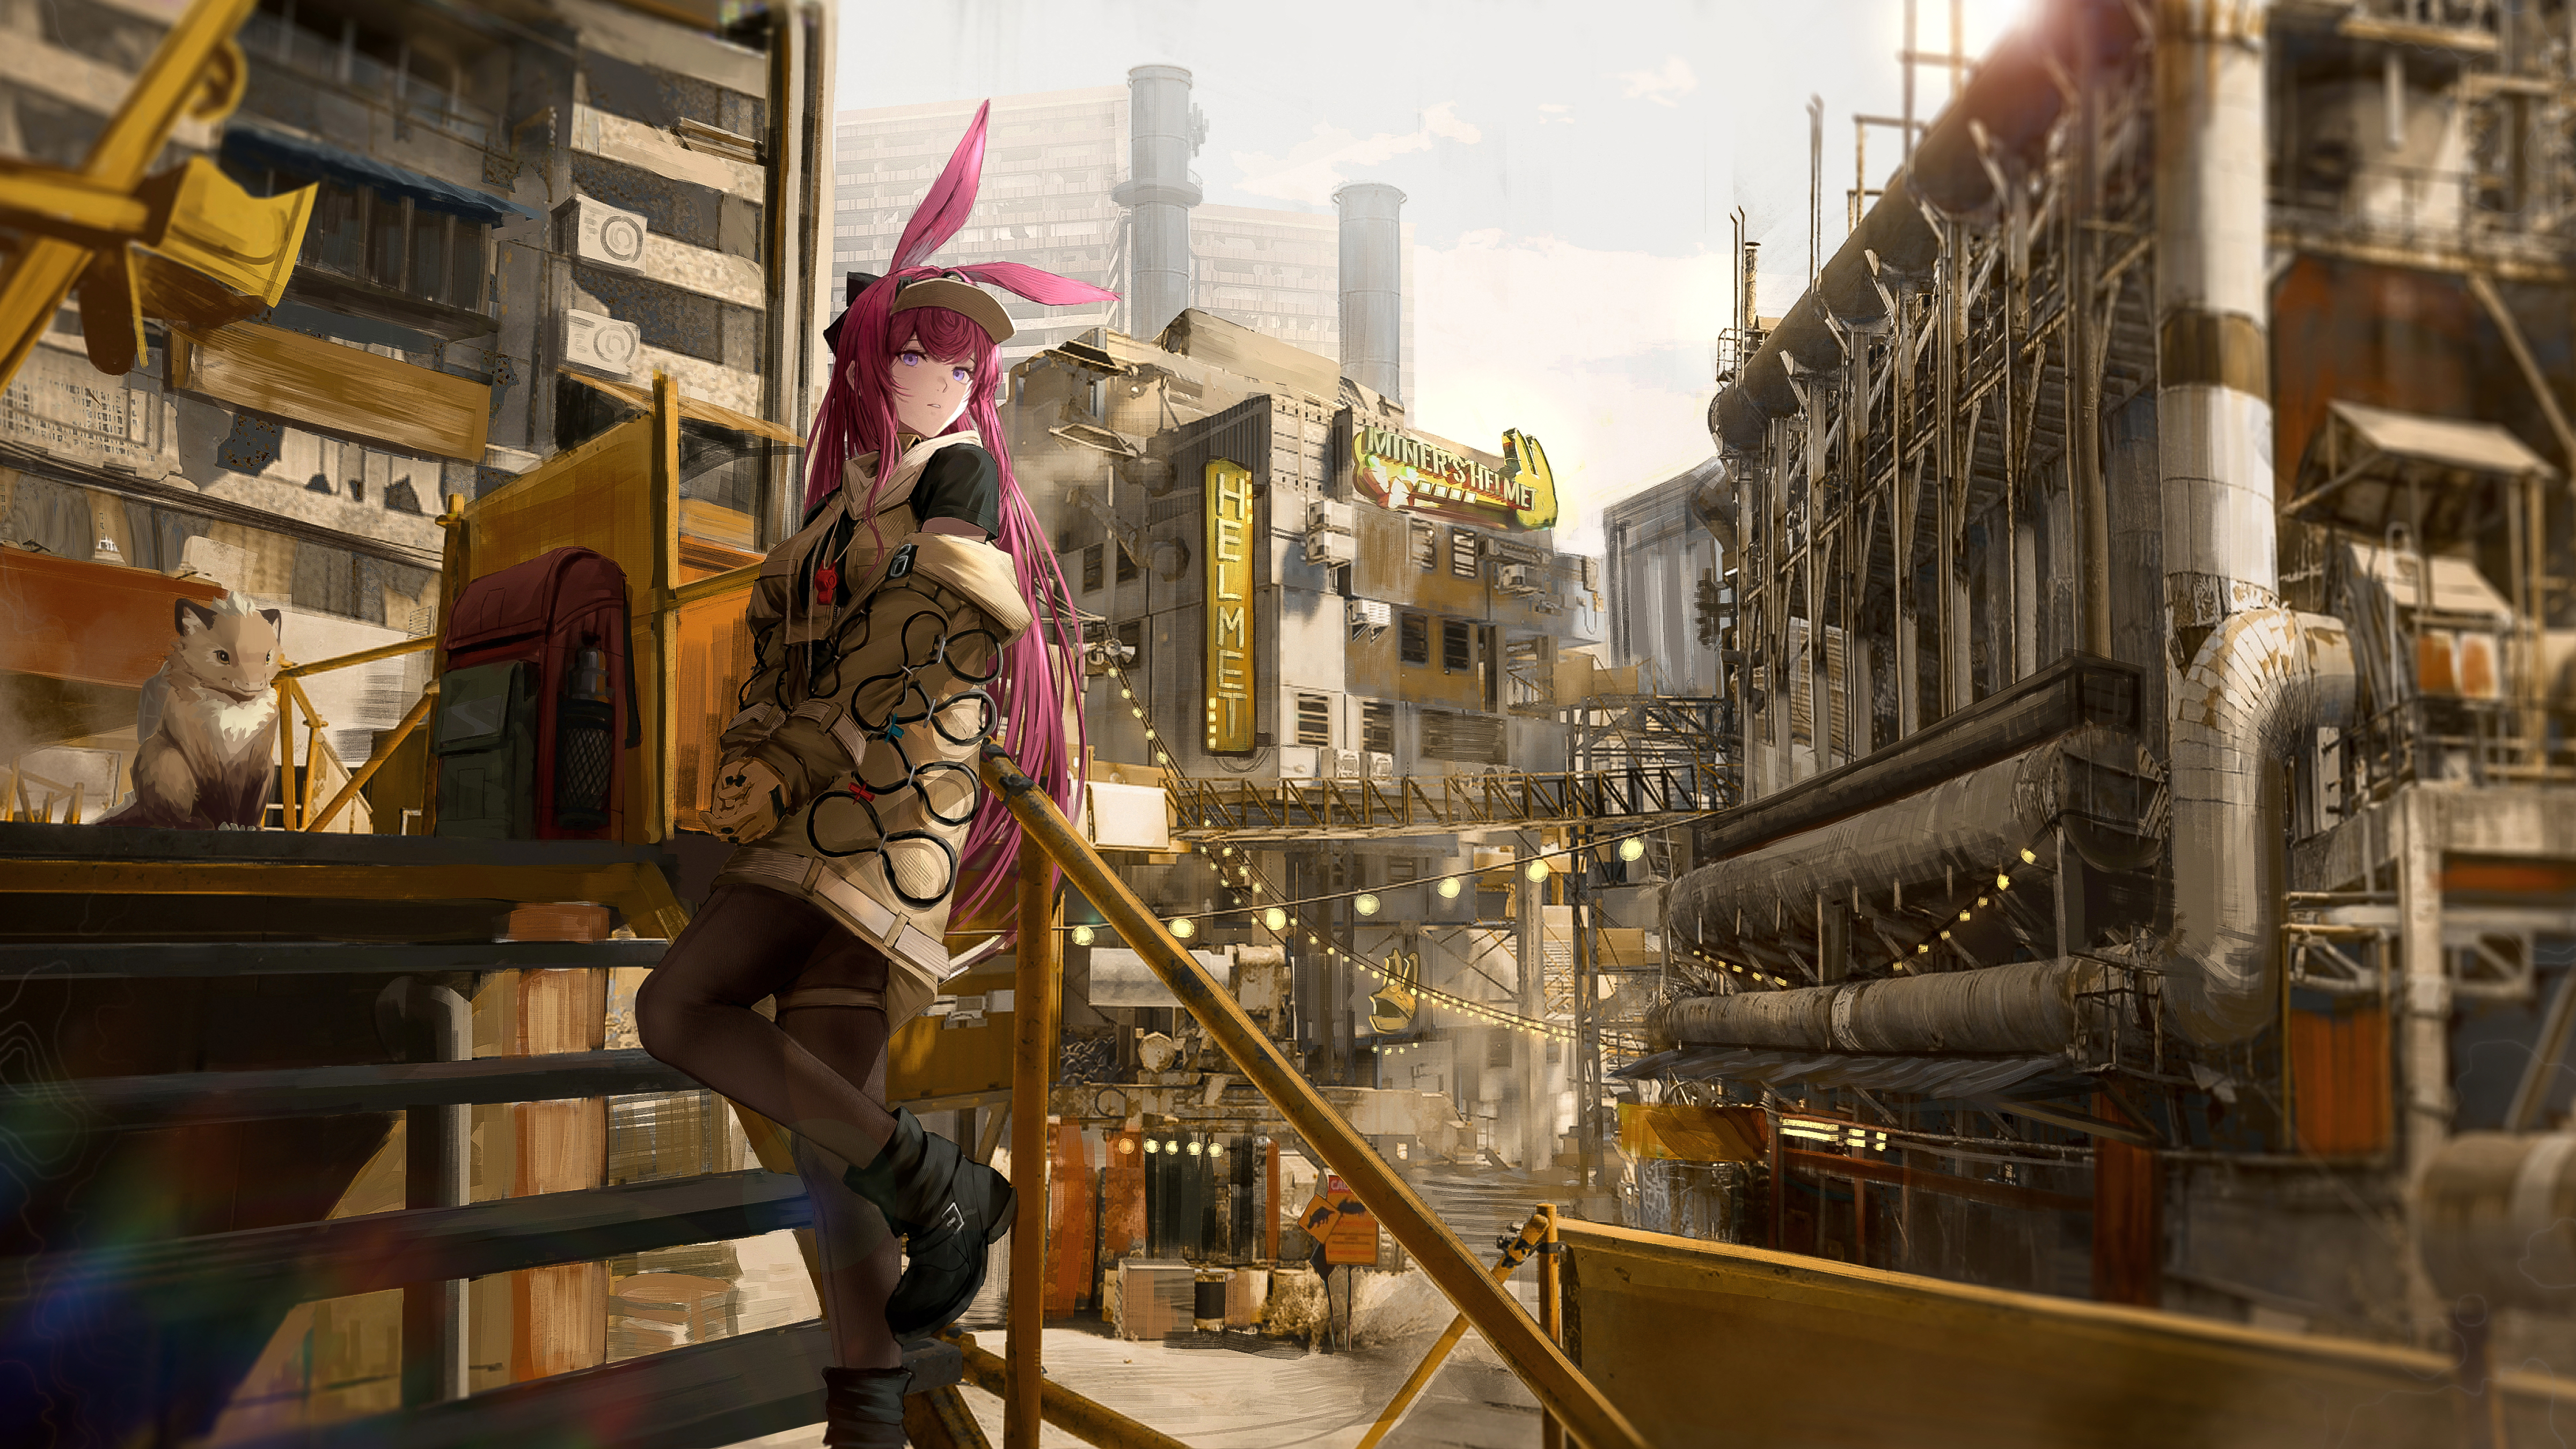 Ray Arknights Arknights Pixiv Anime Anime Girls Anime Games Animal Ears Clouds Long Hair Sky Stairs  4800x2700